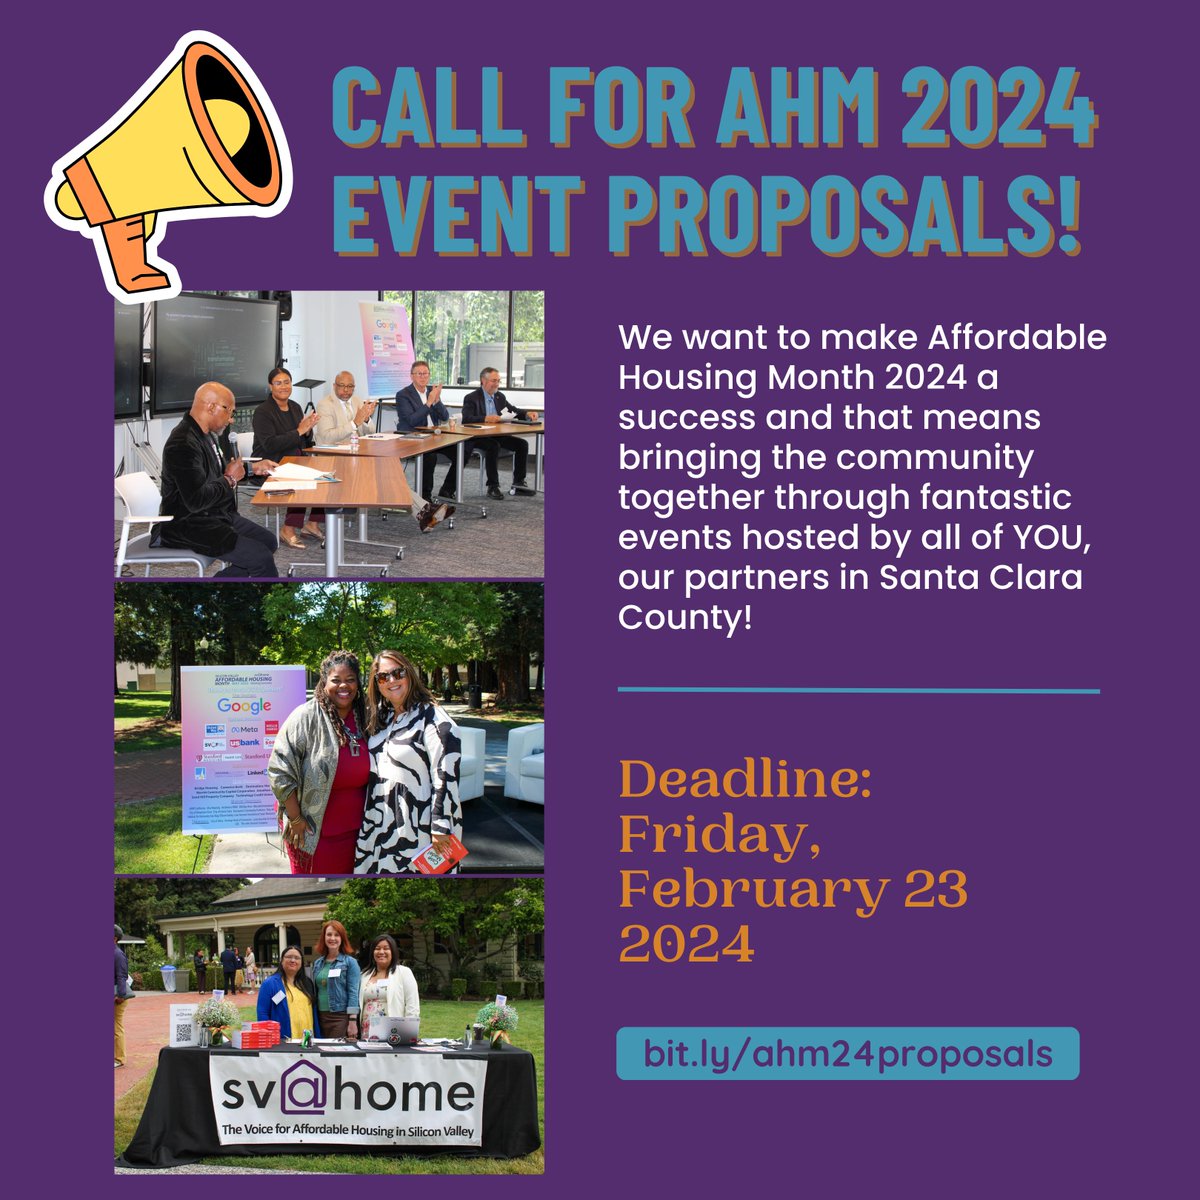 Calling all Affordable Housing Month supporters! We are currently planning Affordable Housing Month (AHM) 2024 coming up in May; we invite you to continue our shared tradition of creating a diverse and impactful month of programming. Learn more: bit.ly/ahm24proposals #AHM2024